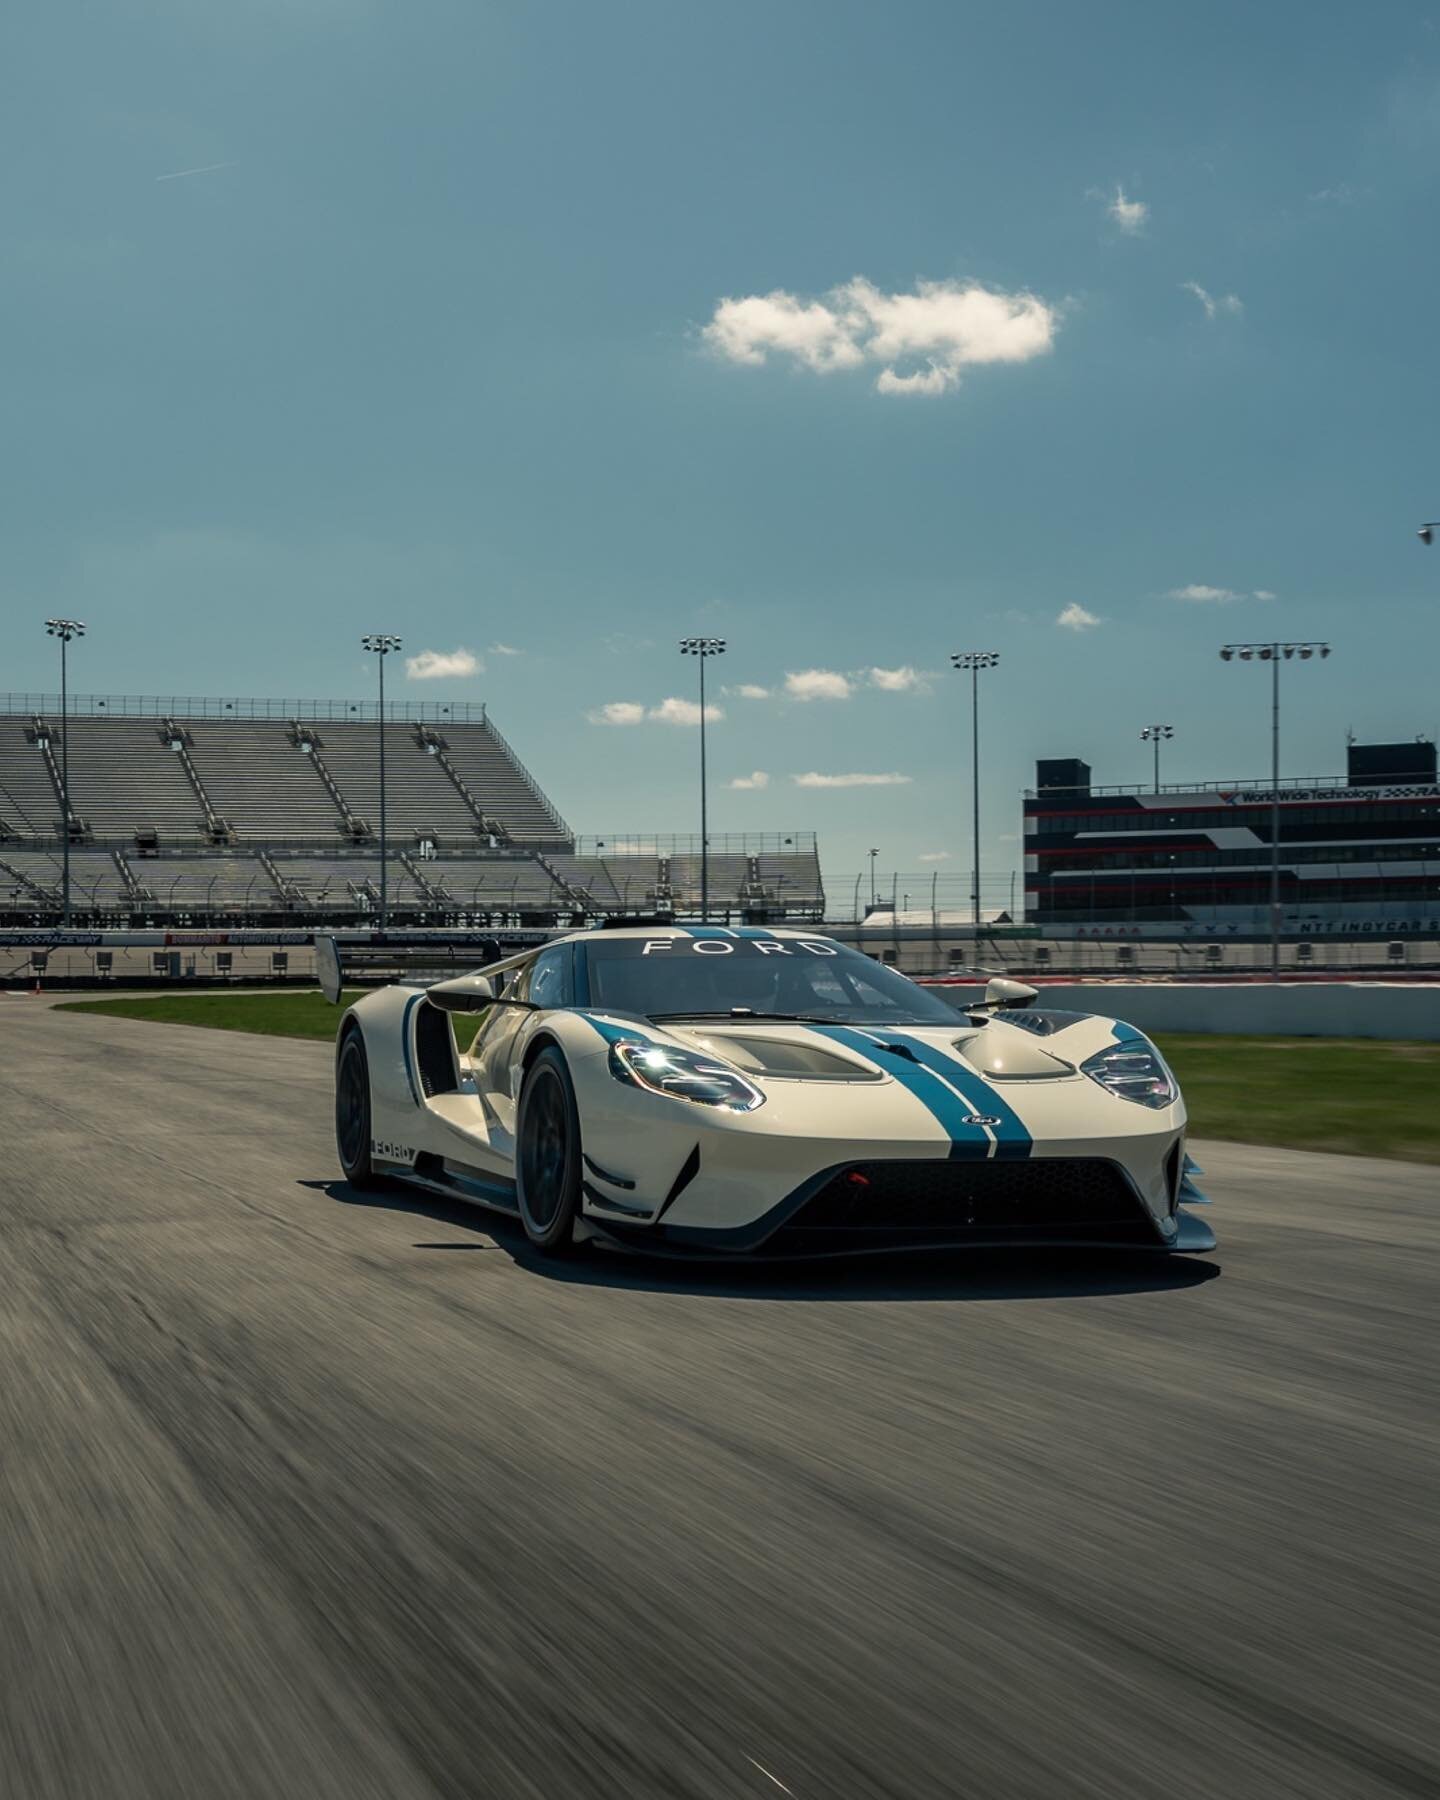 Dream photoshoot achievement unlocked 🔓Still feels like a dream. Figured I should start posting these photos before too much time has passed! 

&mdash;&mdash;&mdash;&mdash;&mdash;&mdash;
#wwtraceway #fordgtsupercar #fordgtracing #fordgt #fordracing 